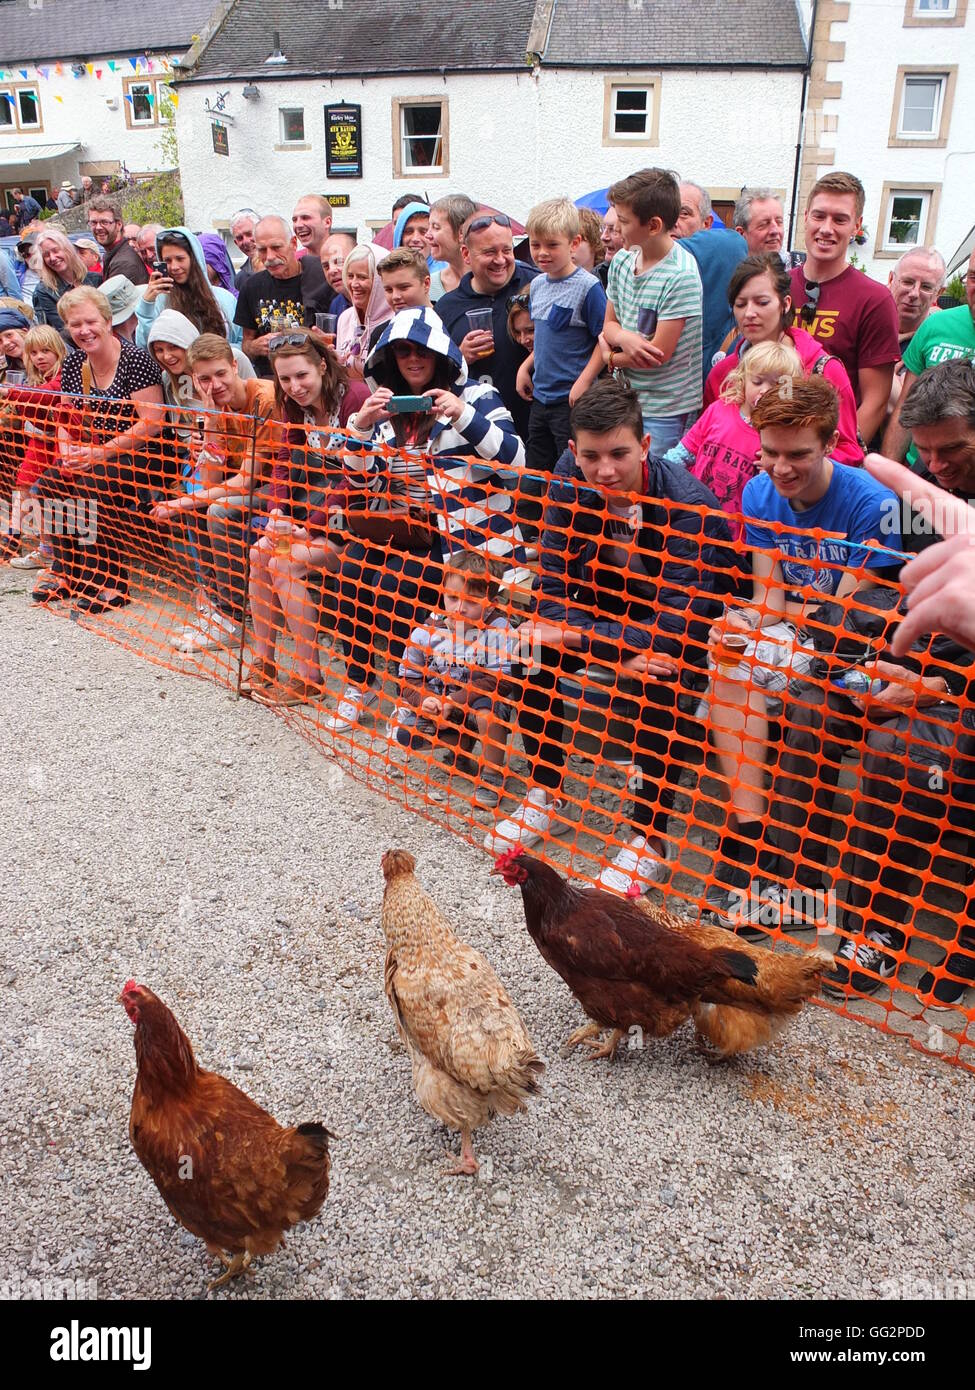 Bonsall World Championship Hen Racing. Spectators watch as hens are released onto the track at the annual event. Stock Photo